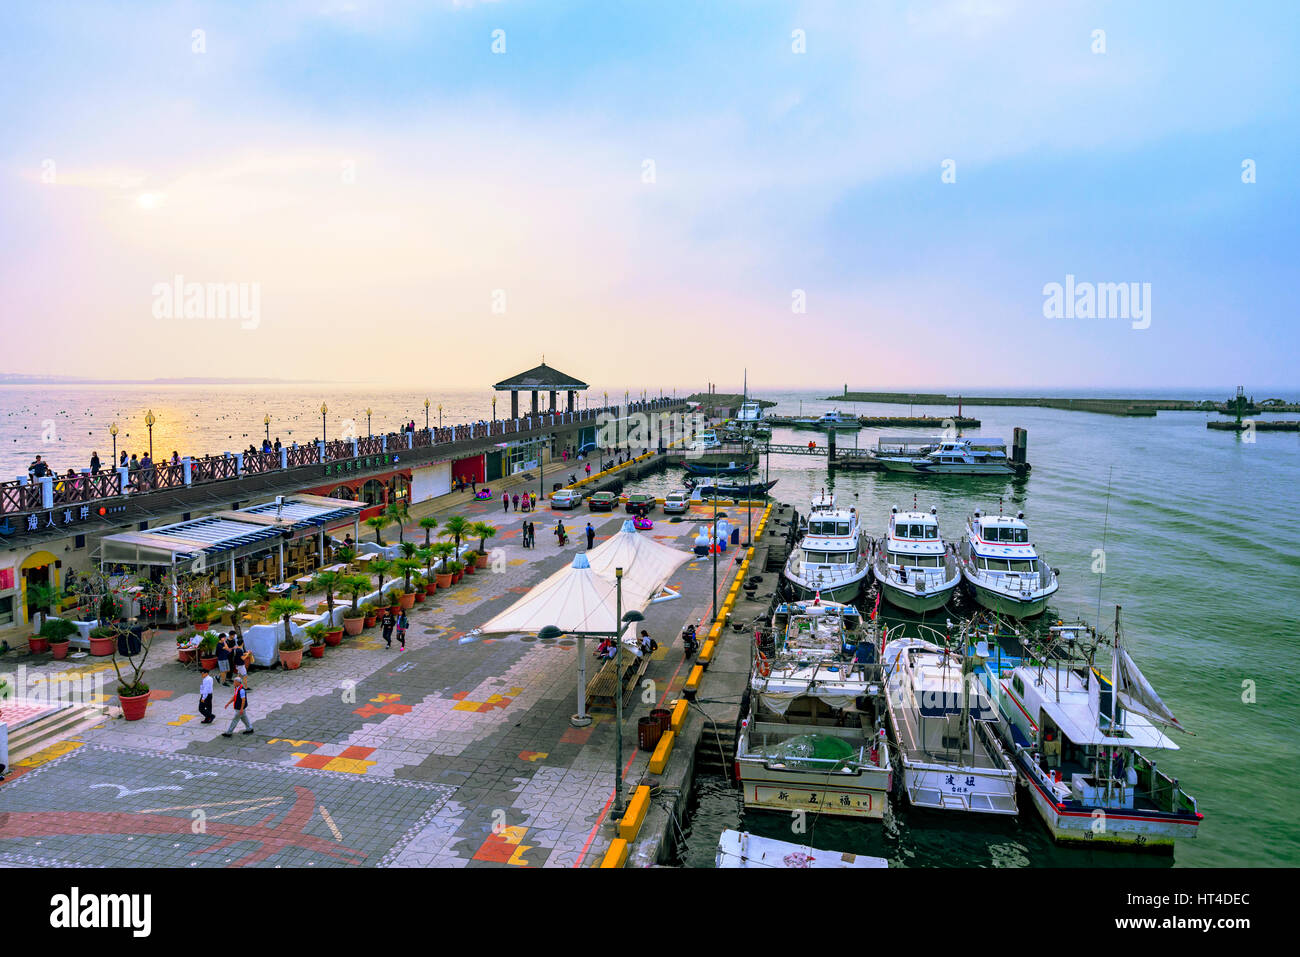 TAIPEI, TAIWAN - JANUARY 05: View of Fisherman's wharf waterfront area with boats in Tamsui a popular tourist destinatination on January 05, 2017 in T Stock Photo